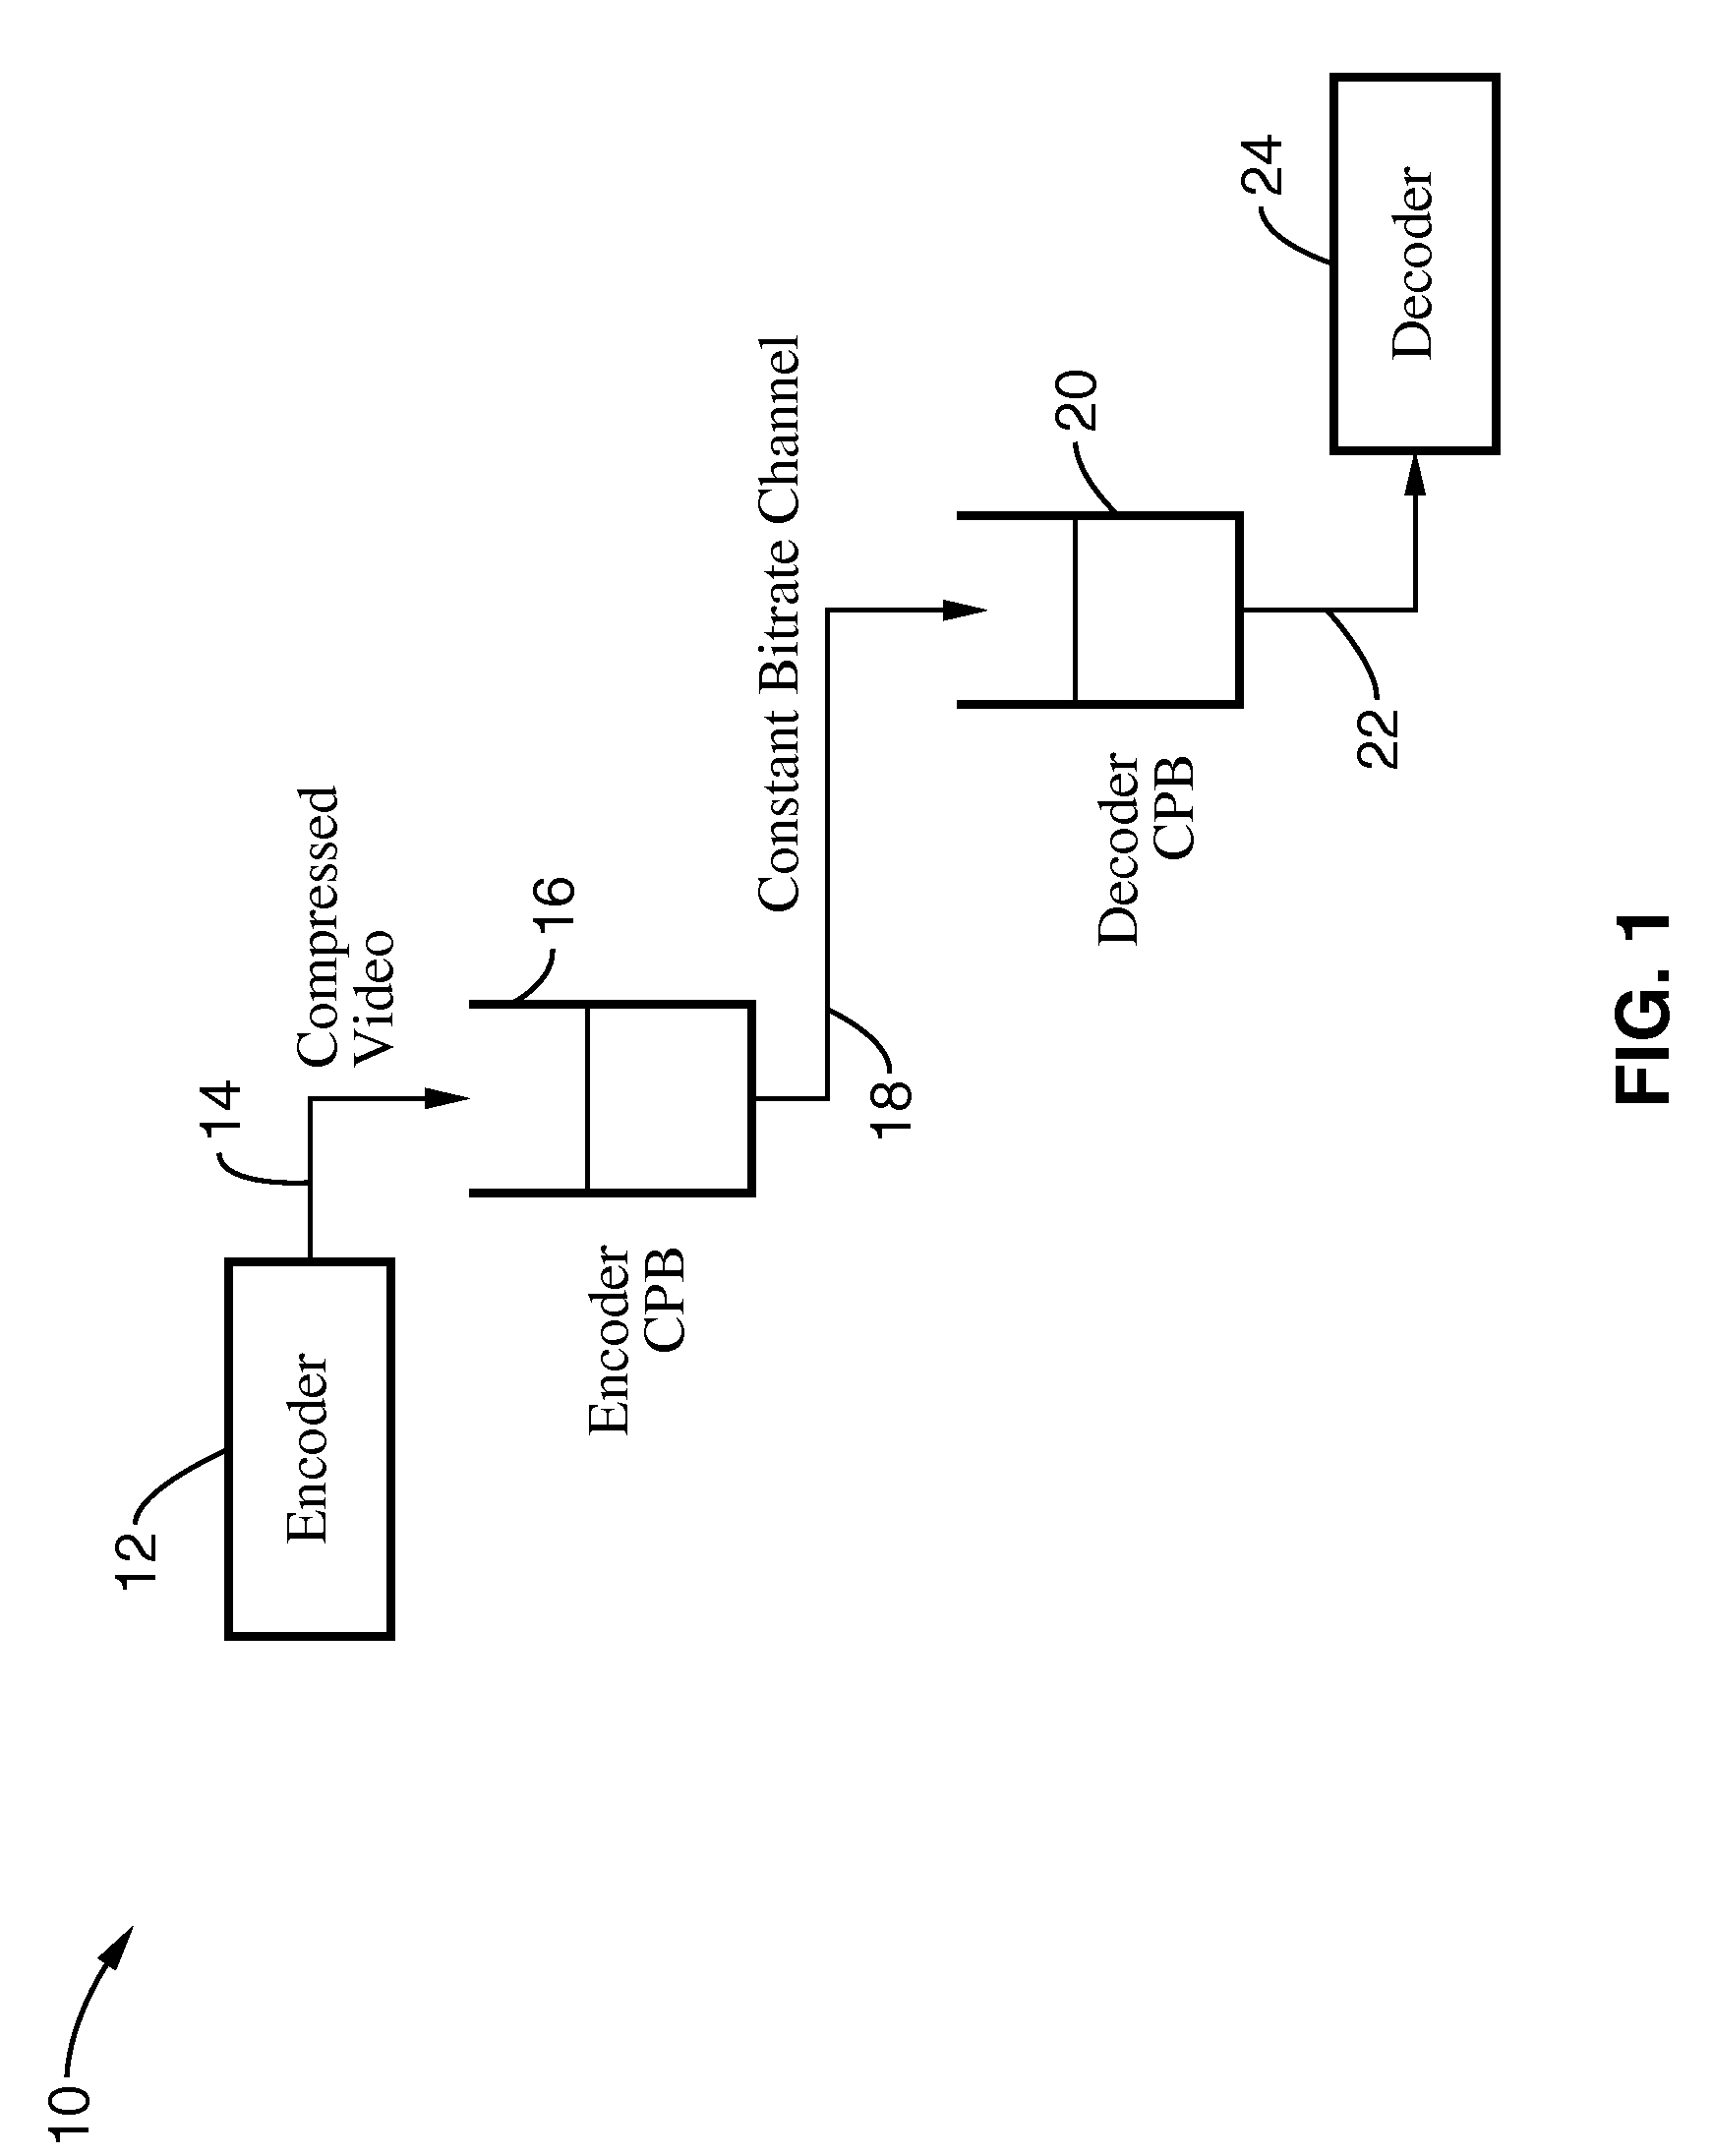 System and method to control compressed video picture quality for a given average bit rate